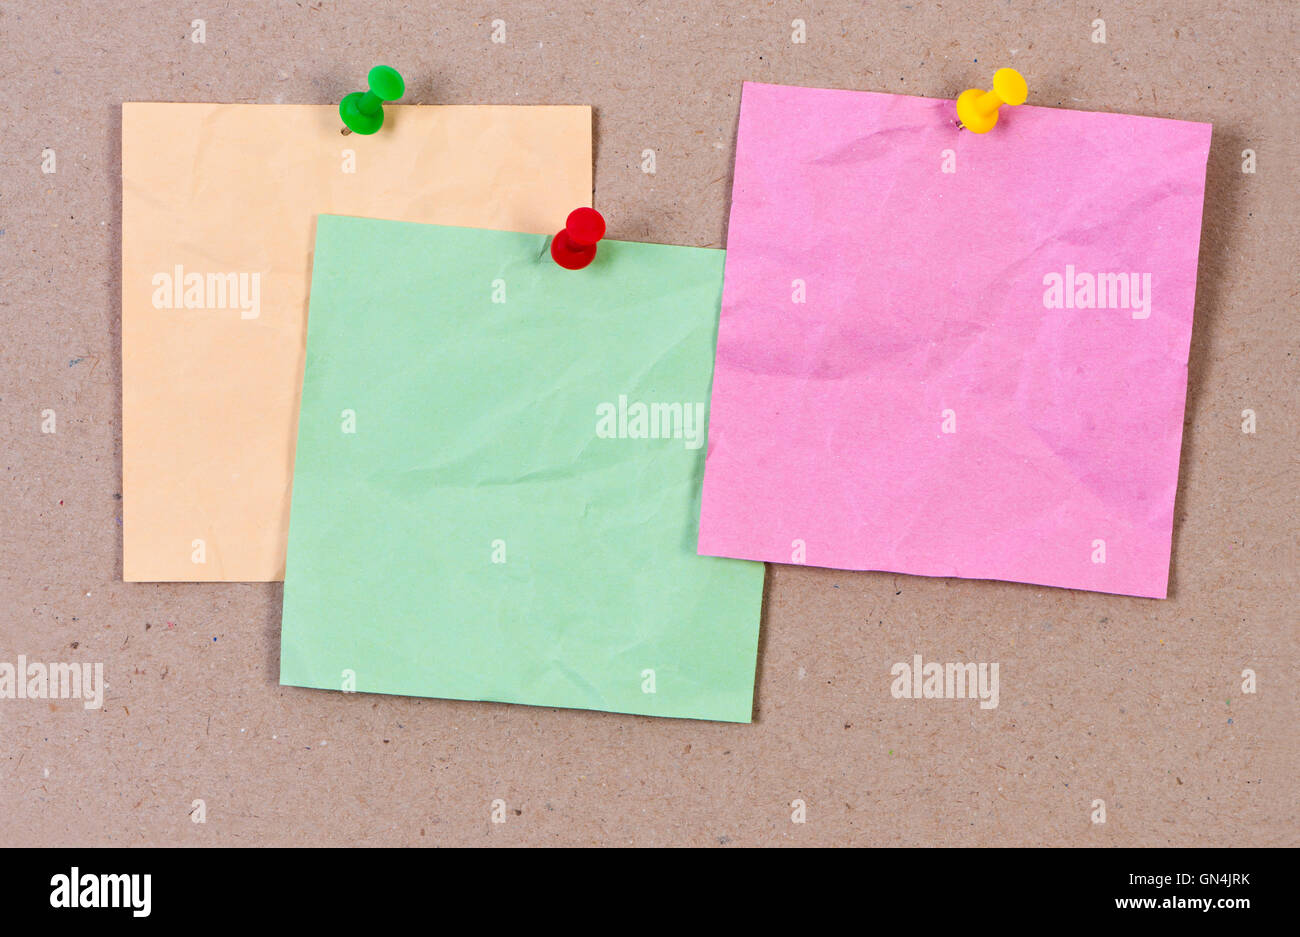 Crumpled sticky notes attached thumbtack. Stock Photo